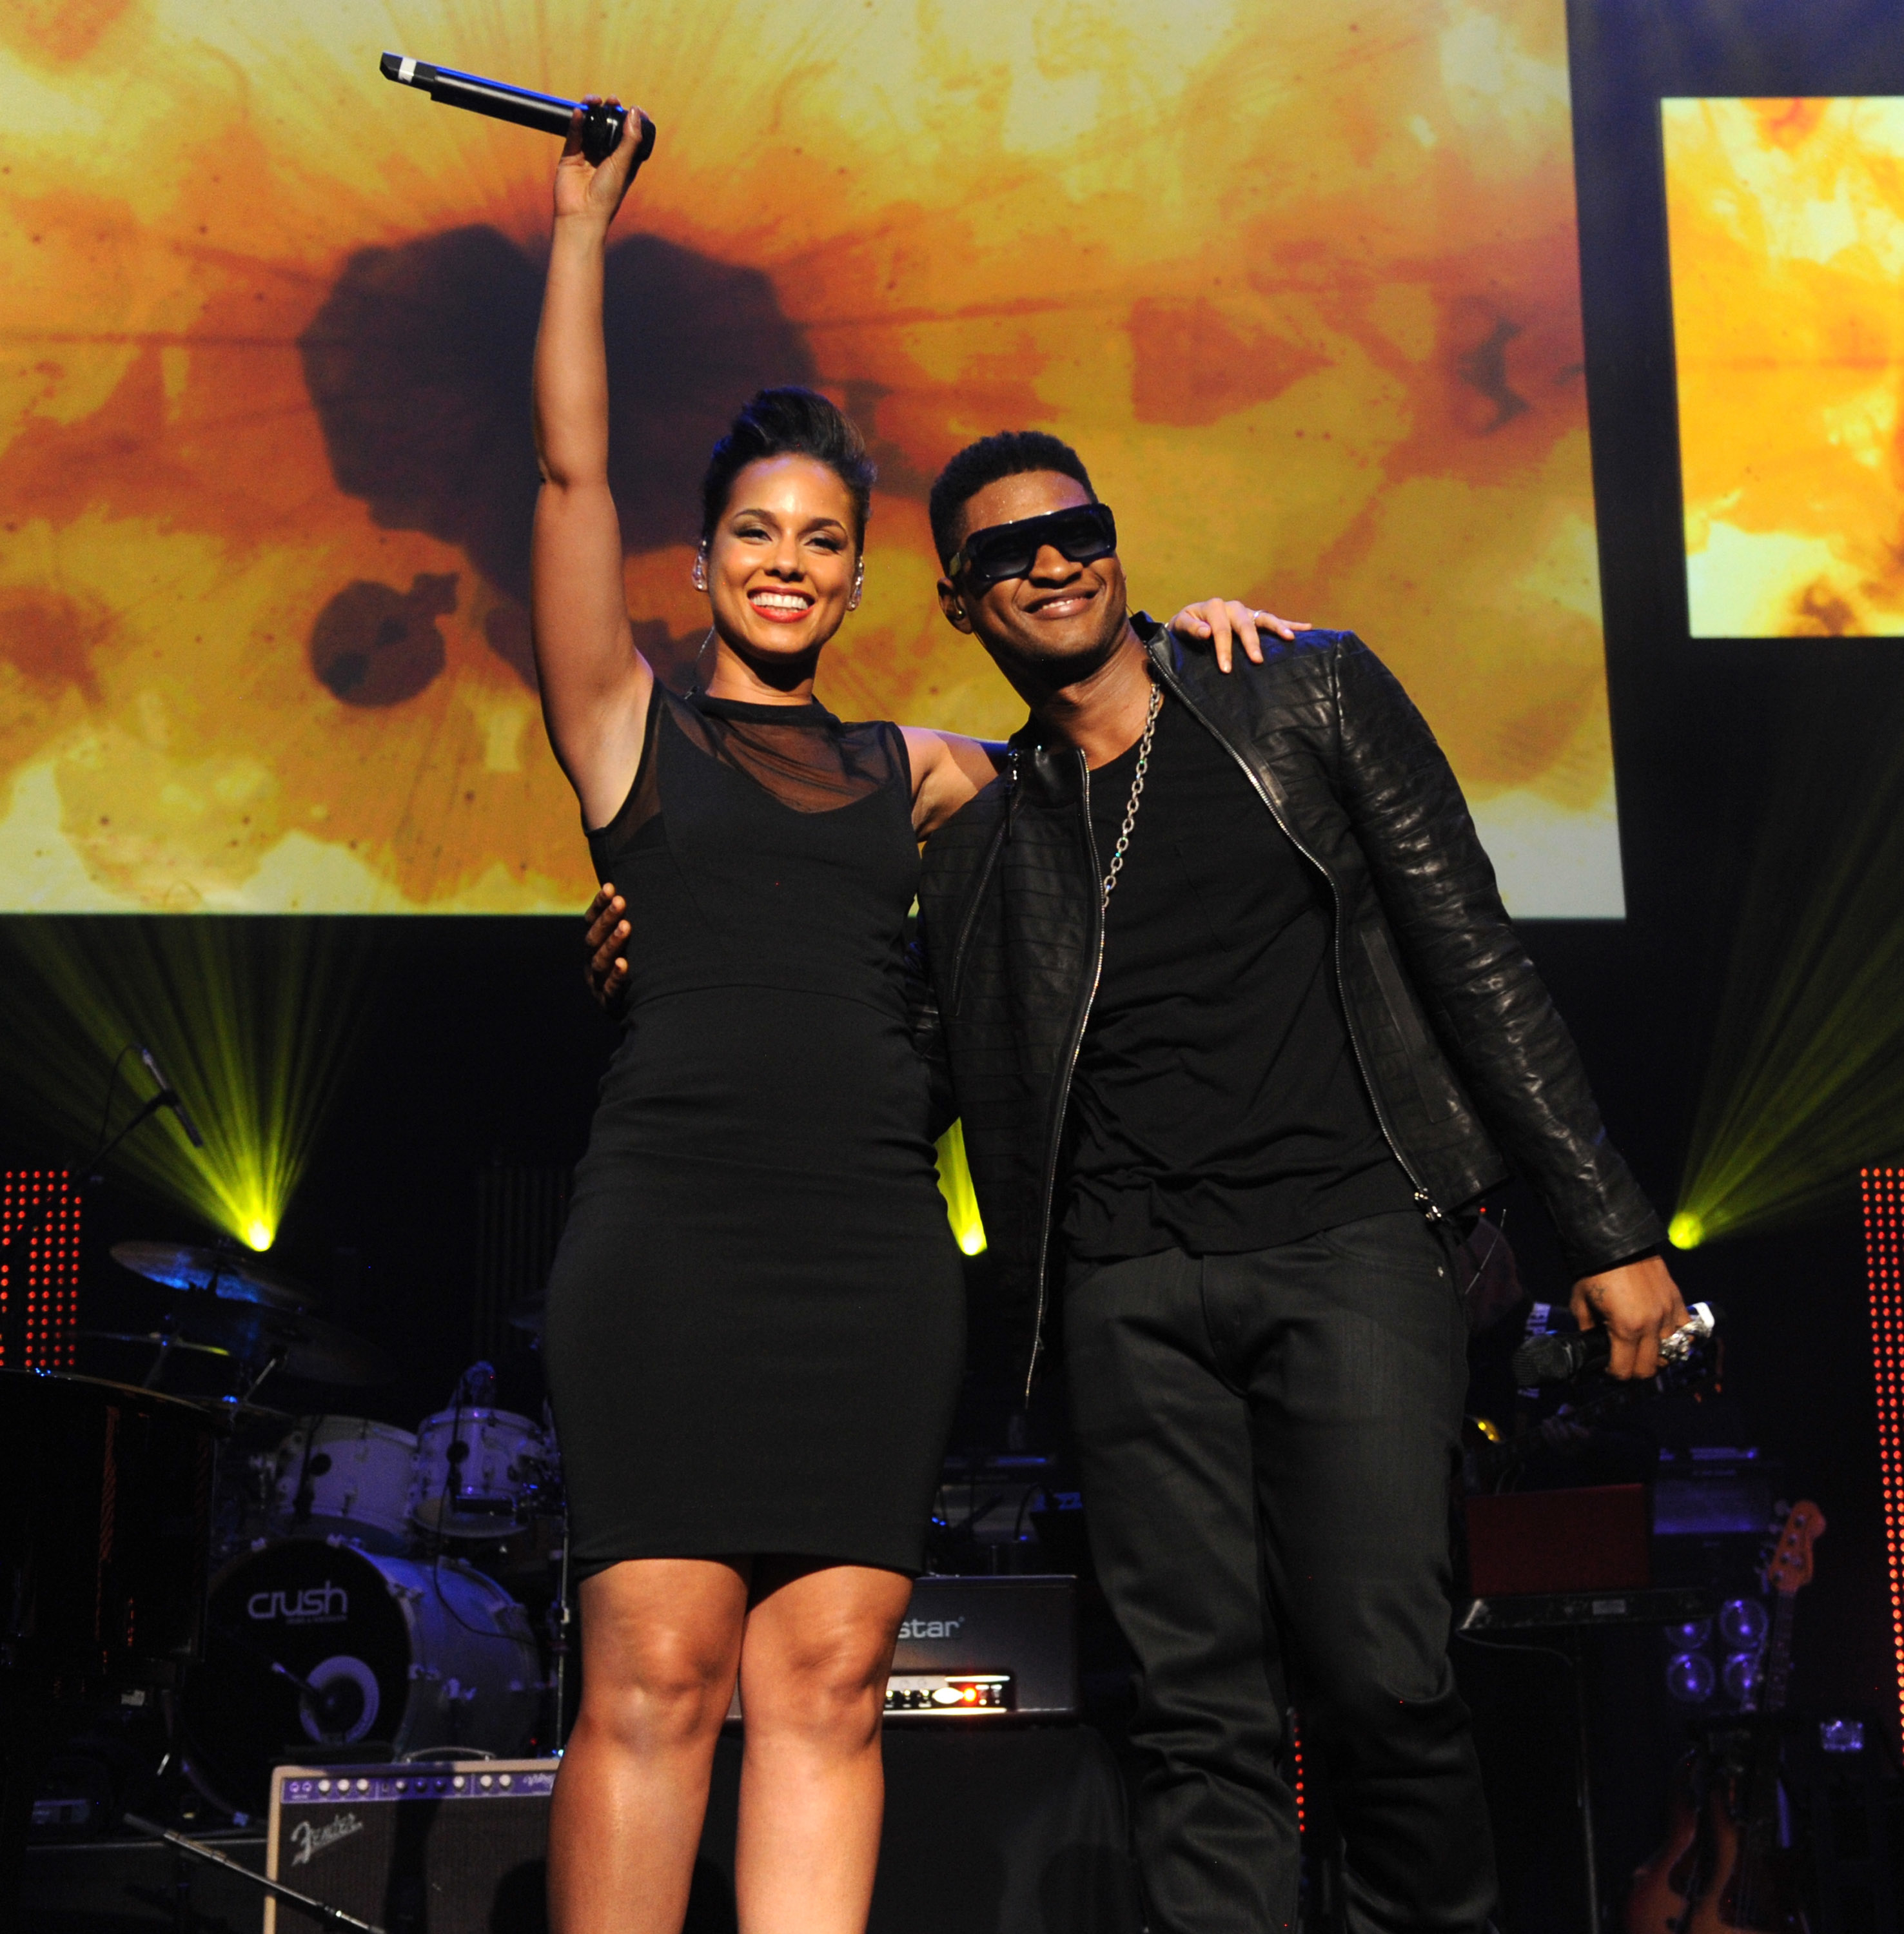 The two performers on stage, Alicia in a sleeveless dress and Usher in leather jacket and sunglasses, both smiling